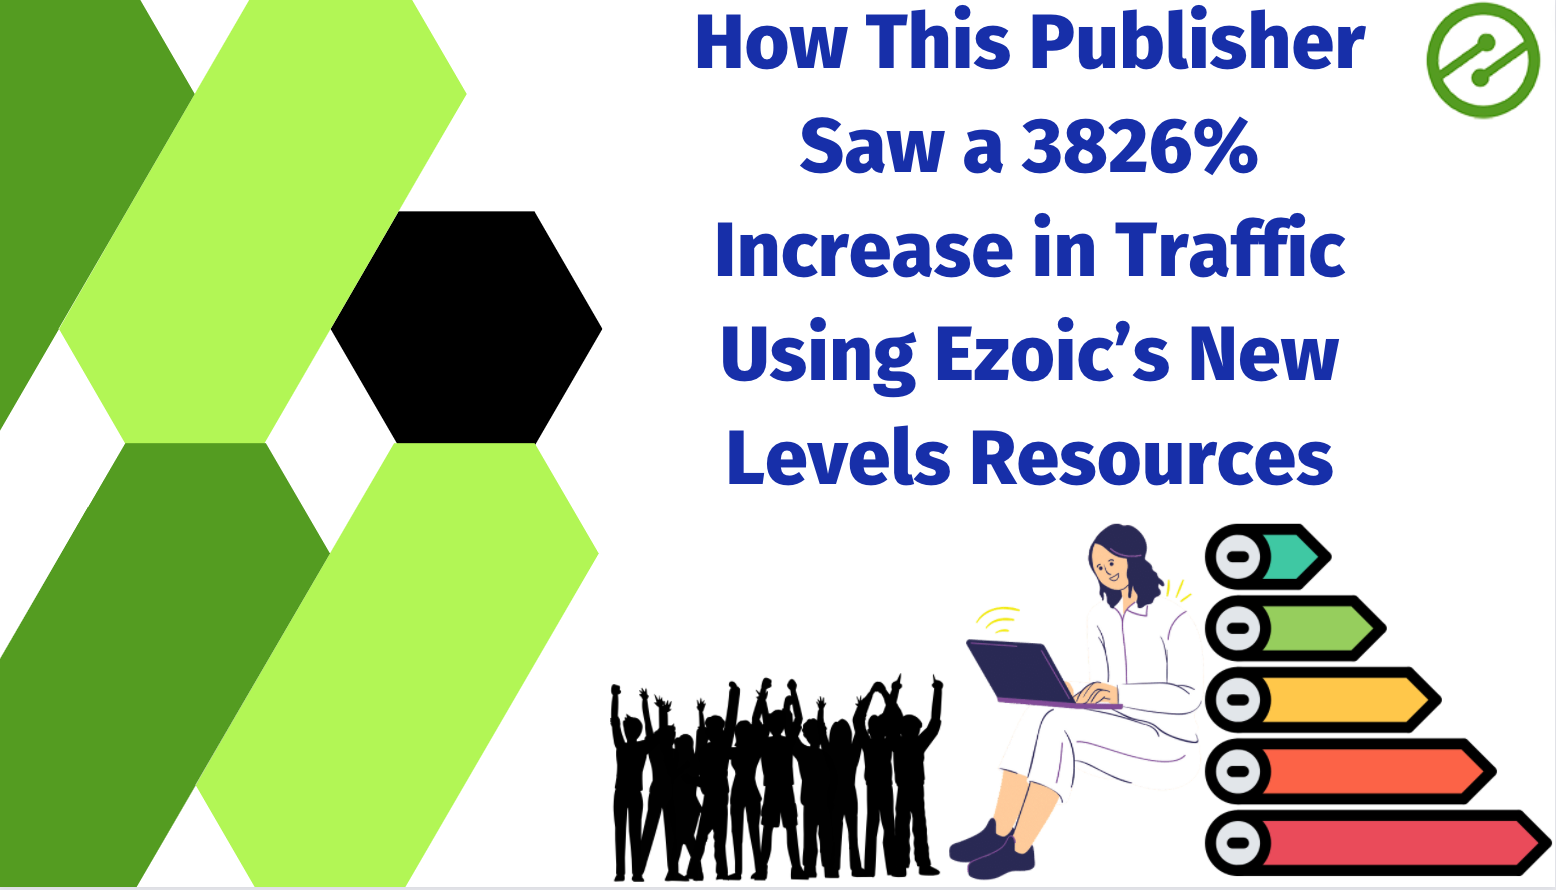 How This Publisher Saw a 3826% Increase in Traffic Using Ezoic’s New Levels Resources